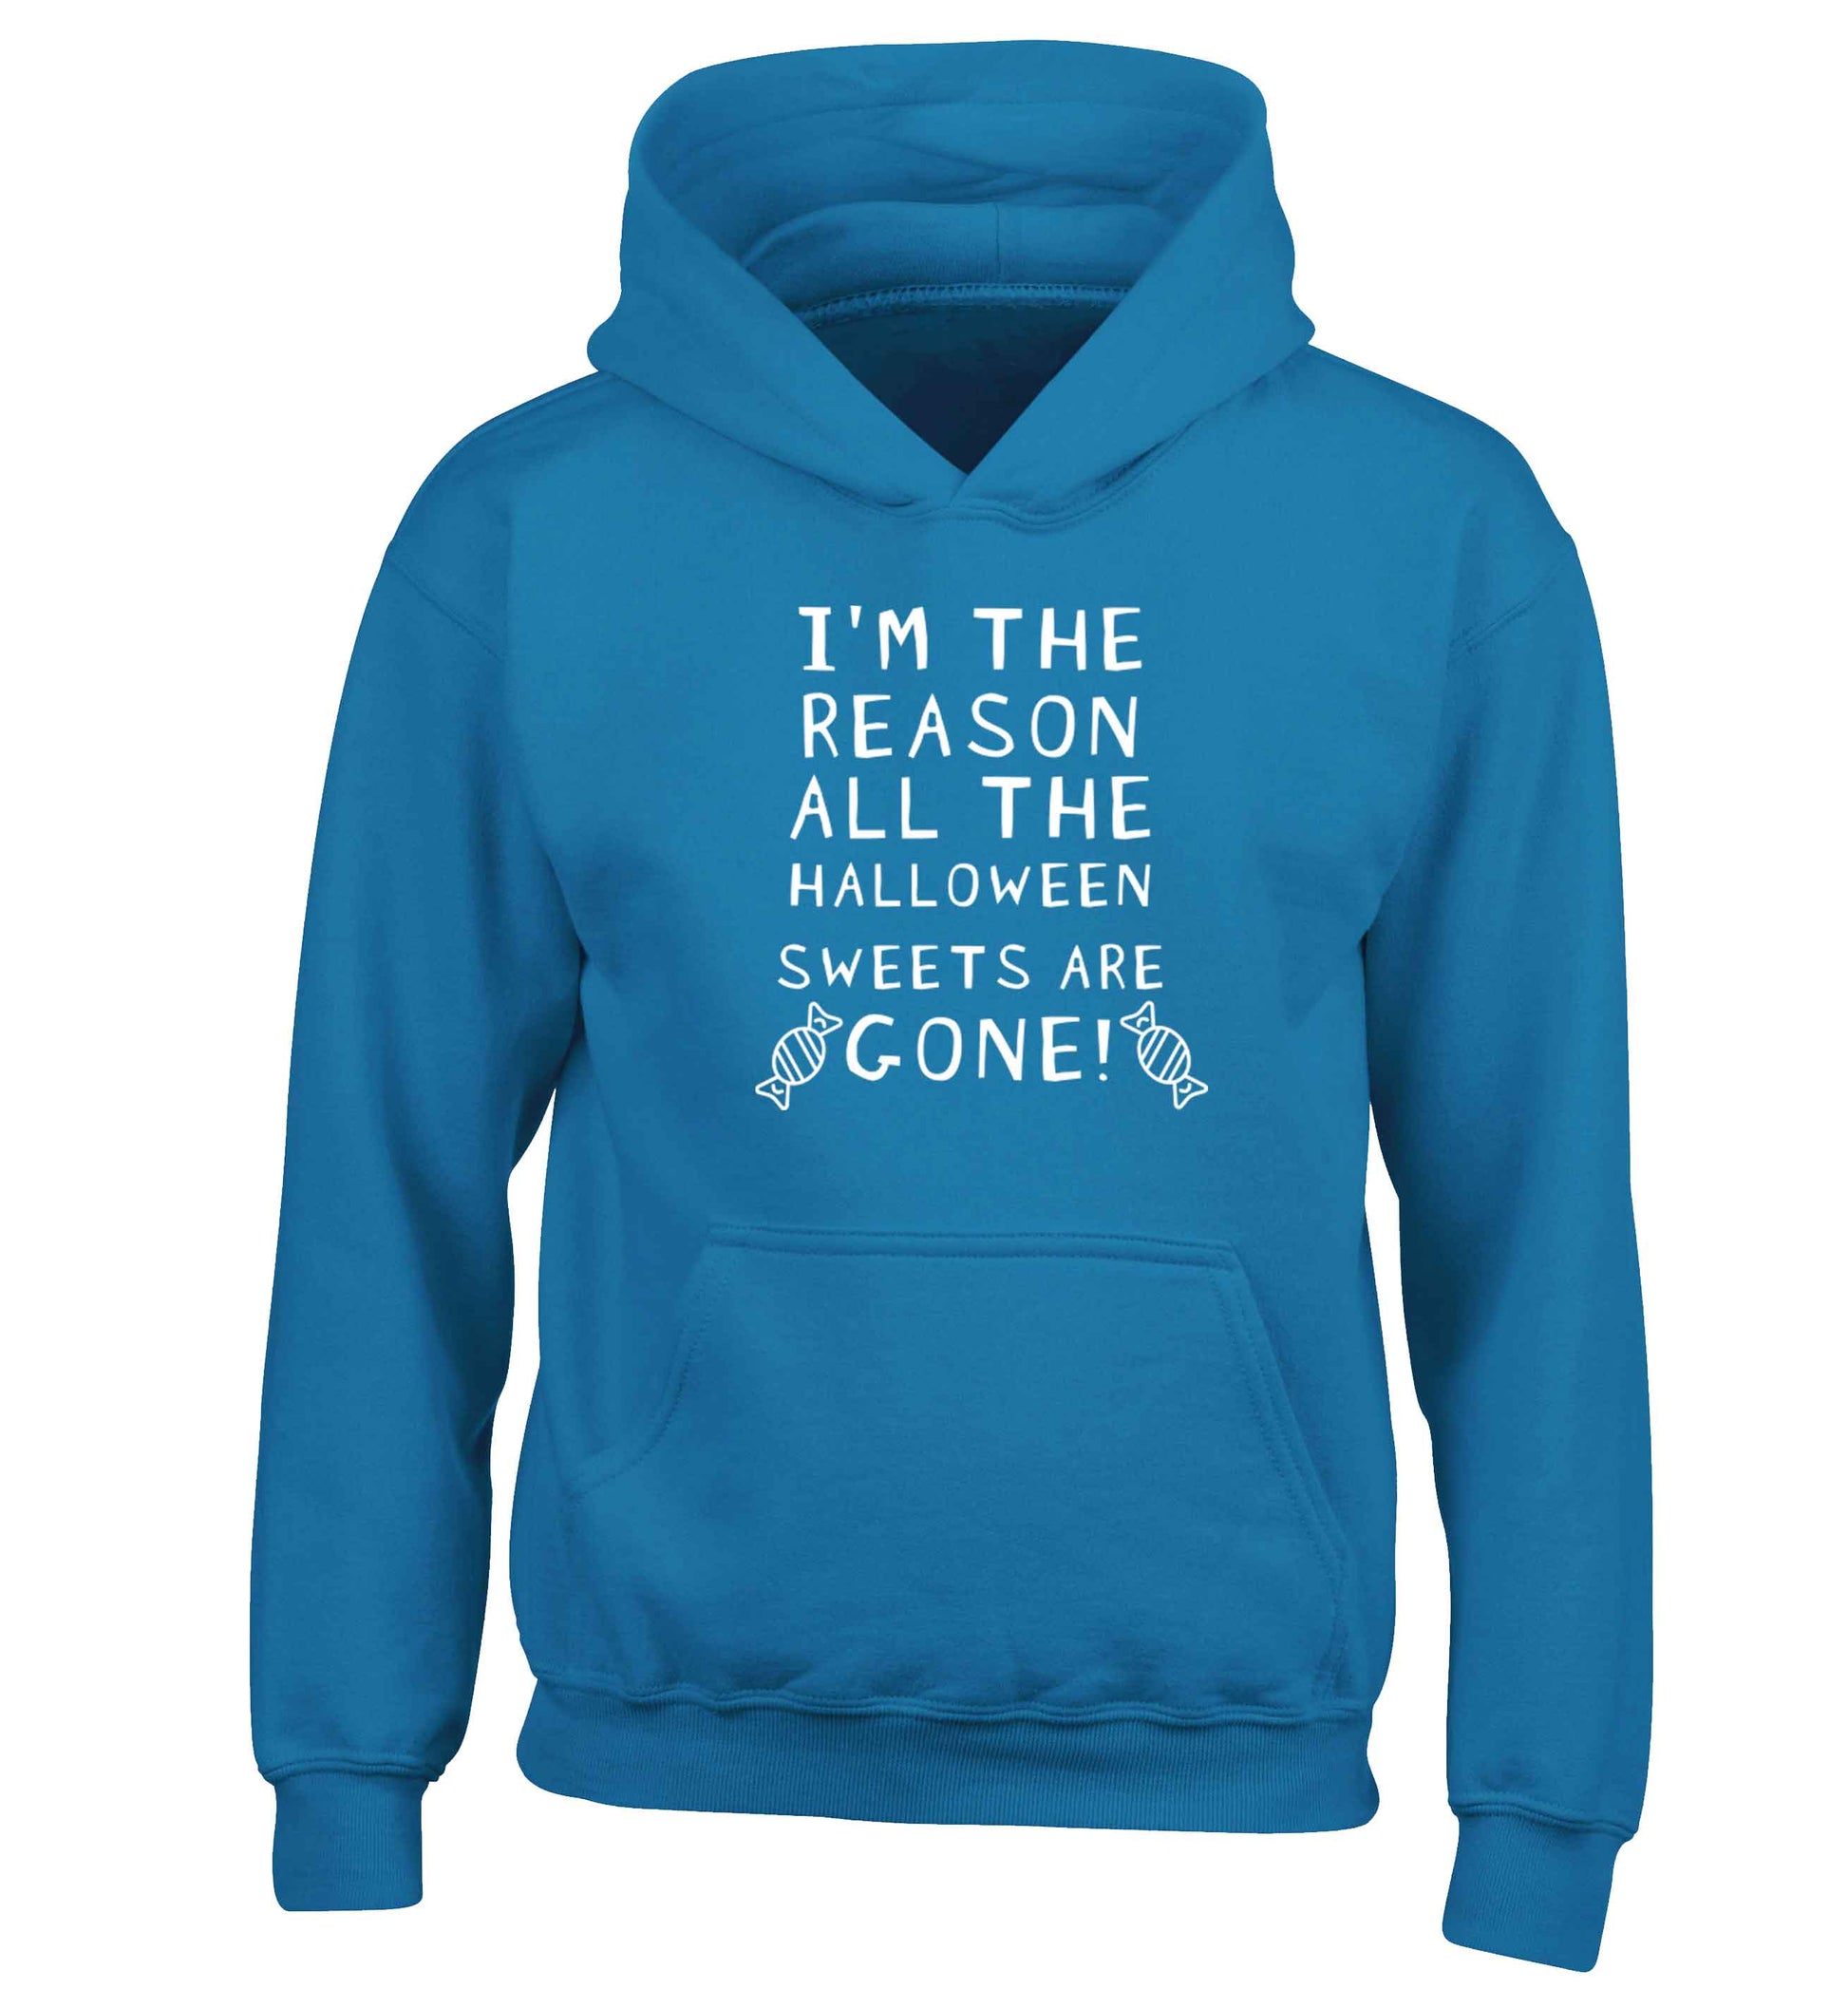 I'm the reason all of the halloween sweets are gone children's blue hoodie 12-13 Years